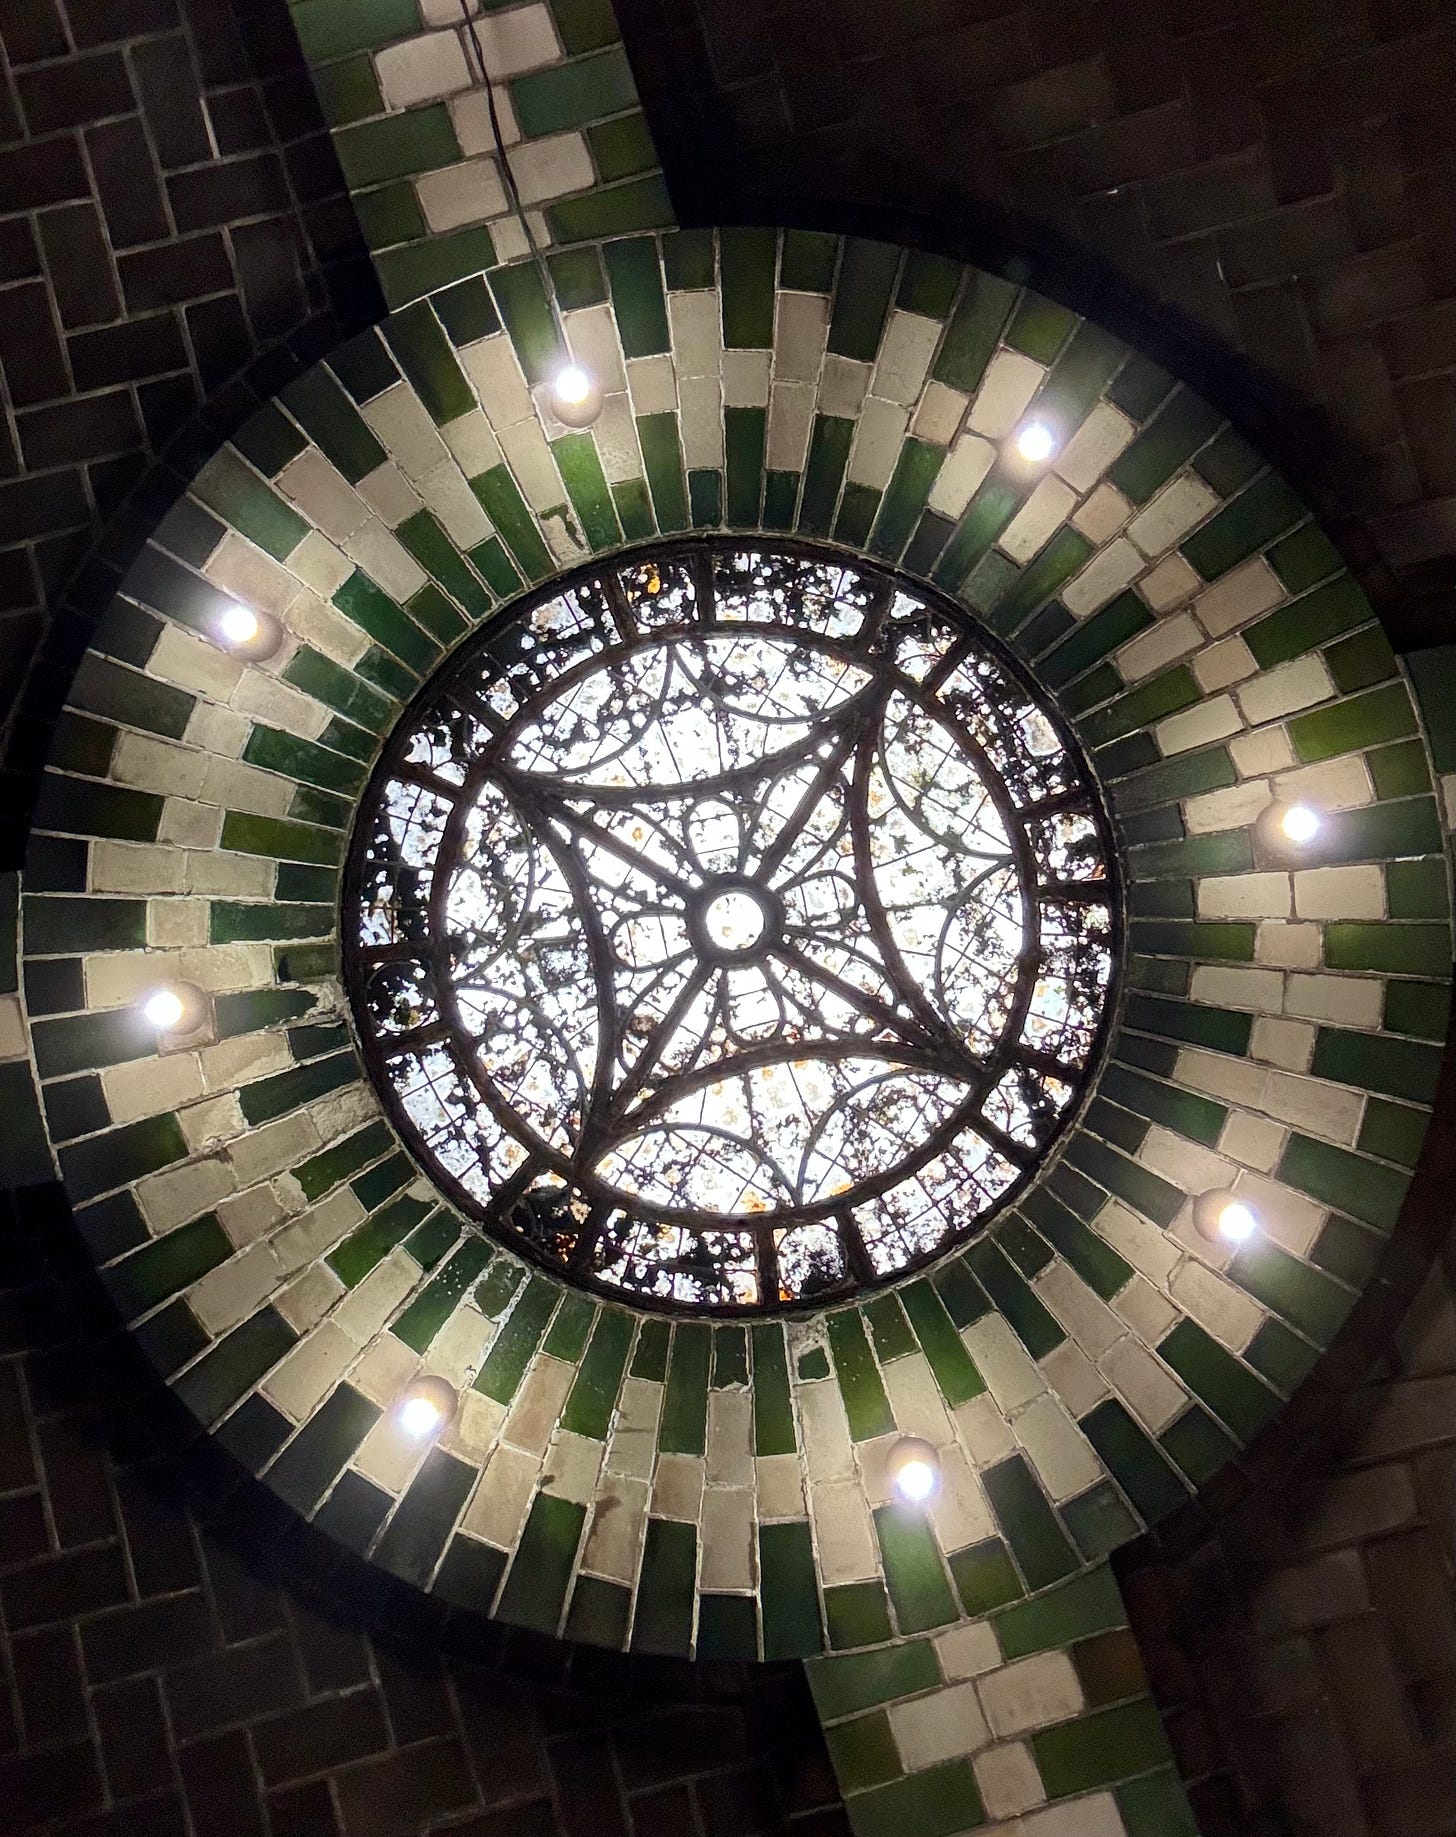 A detail picture of the circular skylight pattern.